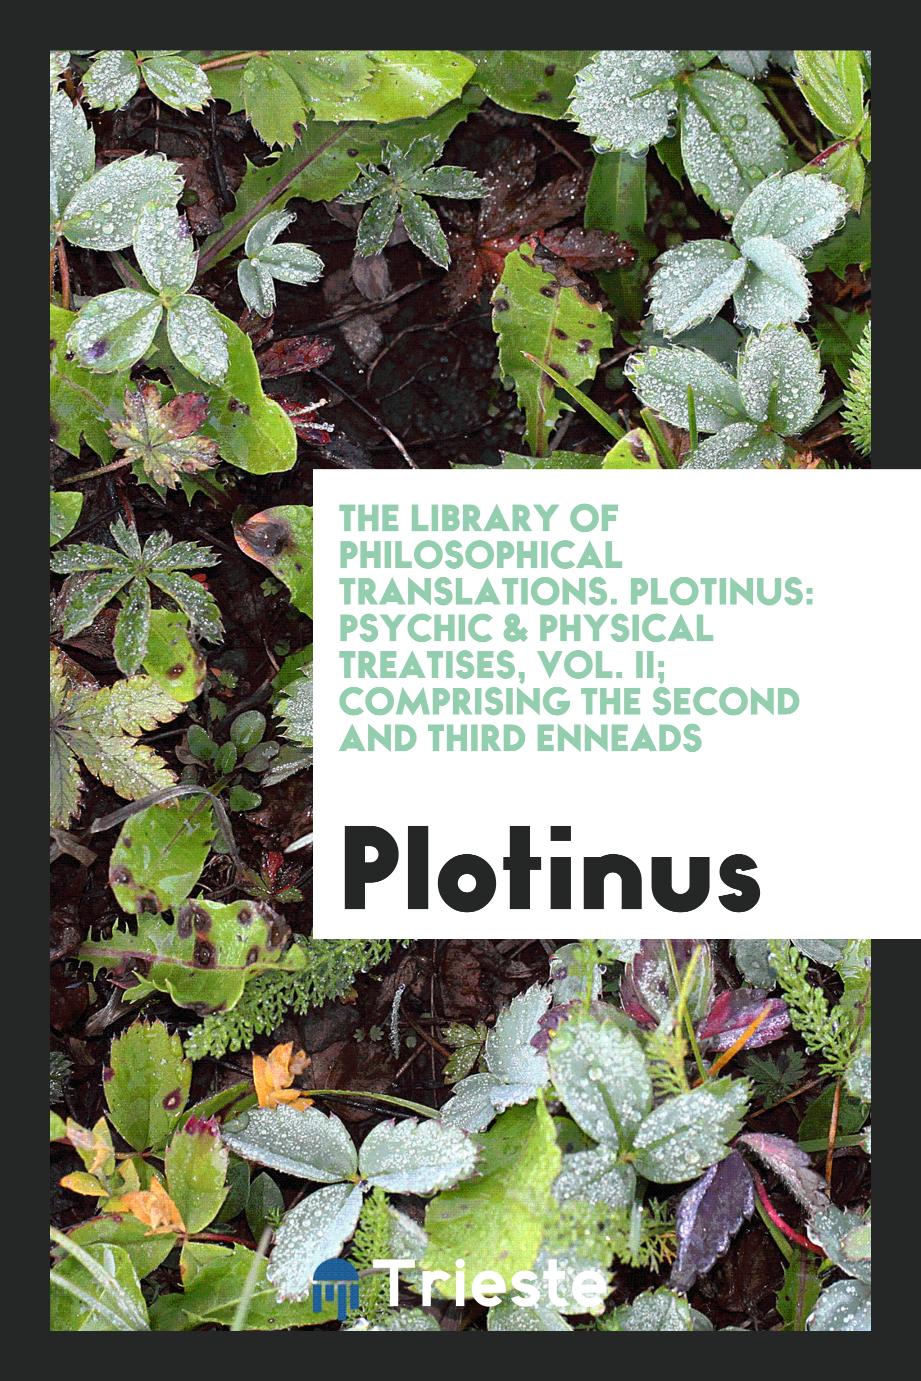 The library of philosophical translations. Plotinus: psychic & physical treatises, Vol. II; comprising the second and third Enneads